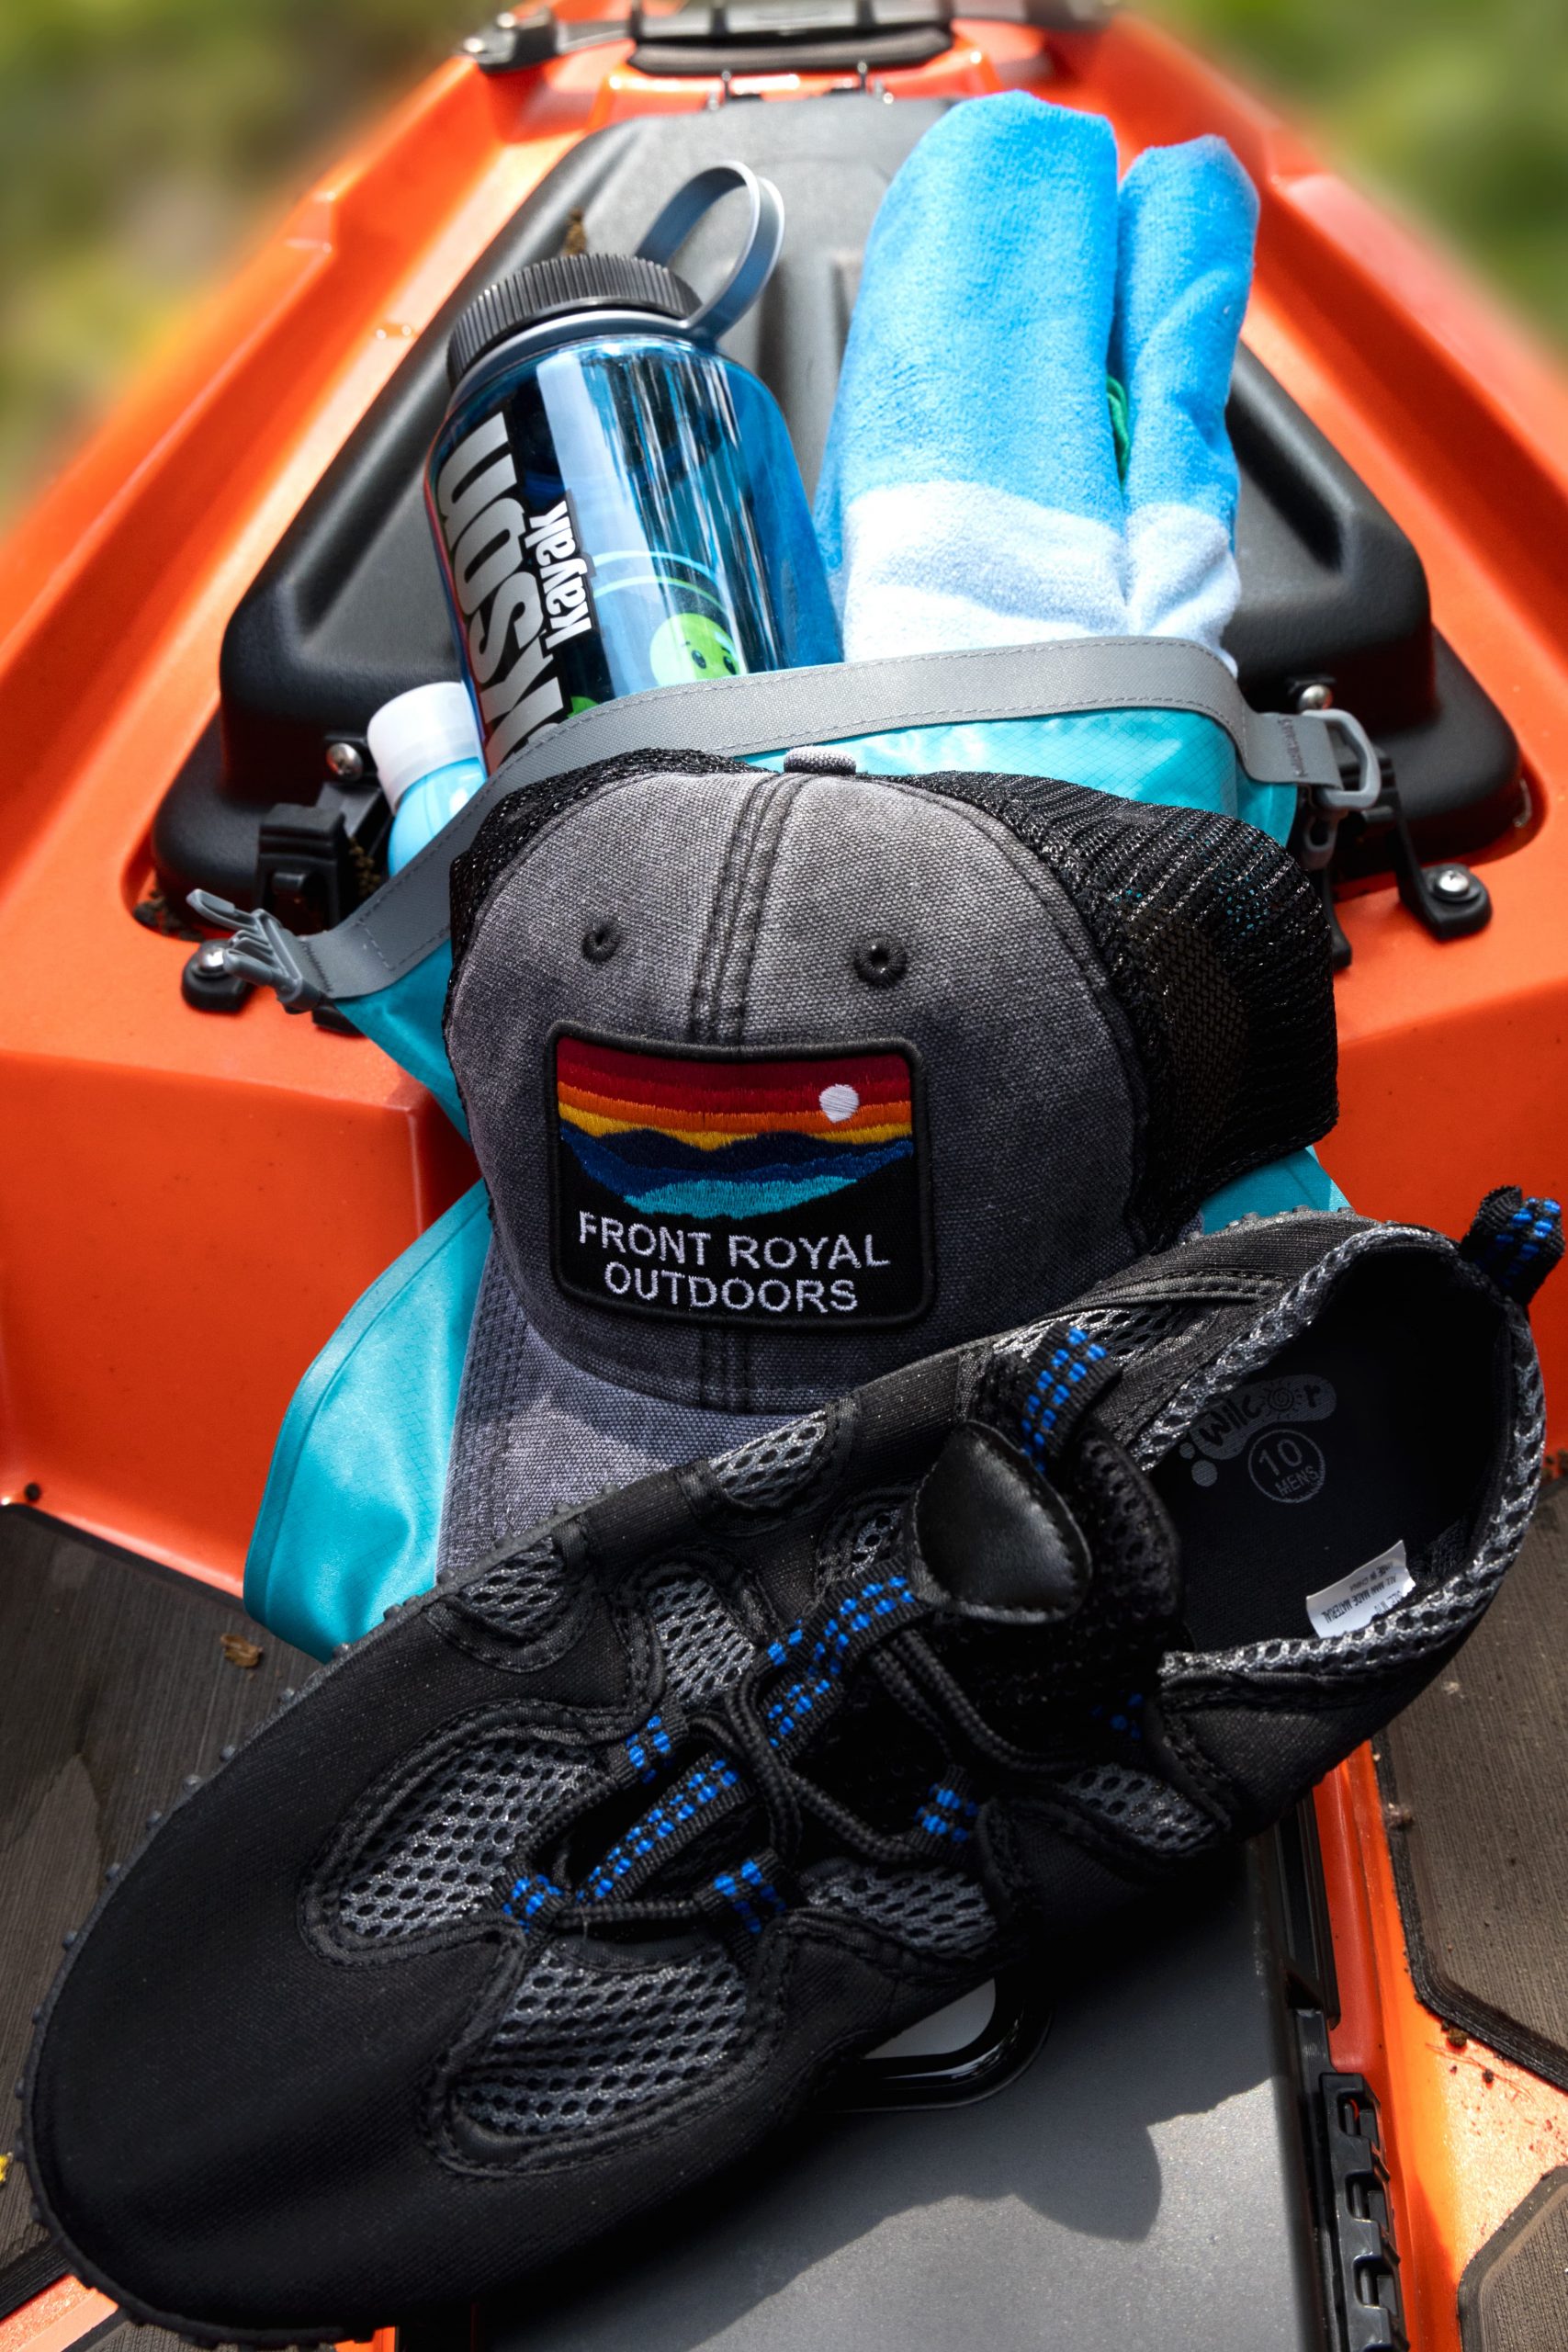 a baseball hat, water shoes, water bottle, and towel in an orange kayak